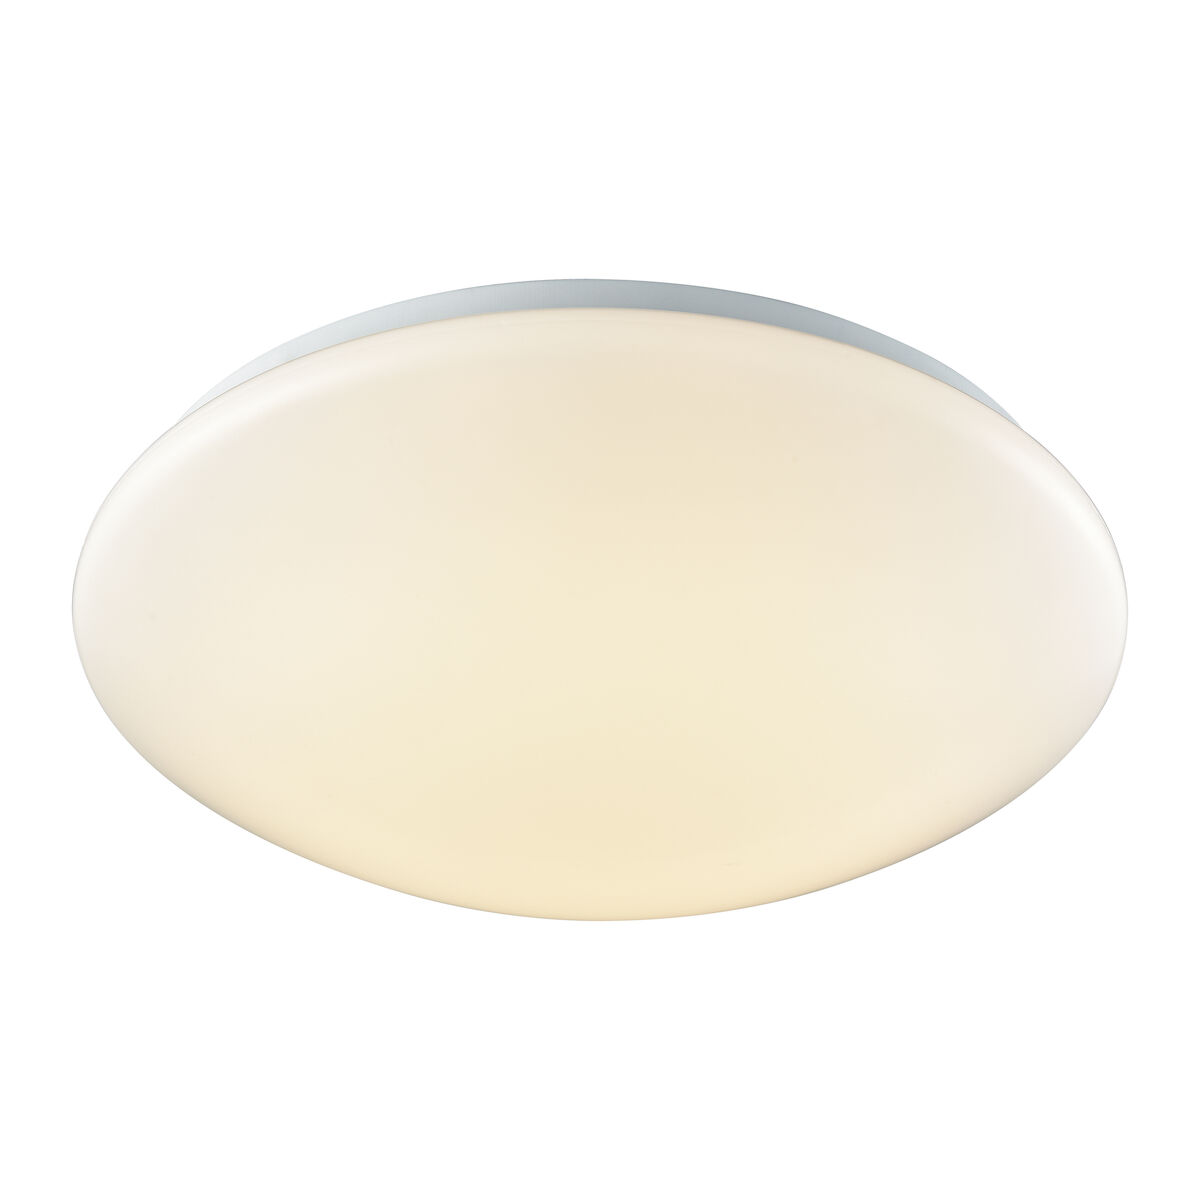 Classic  Indoor China Round Decoration Large White Acrylic Shade Round Modern Home LED Light for living room ceiling light